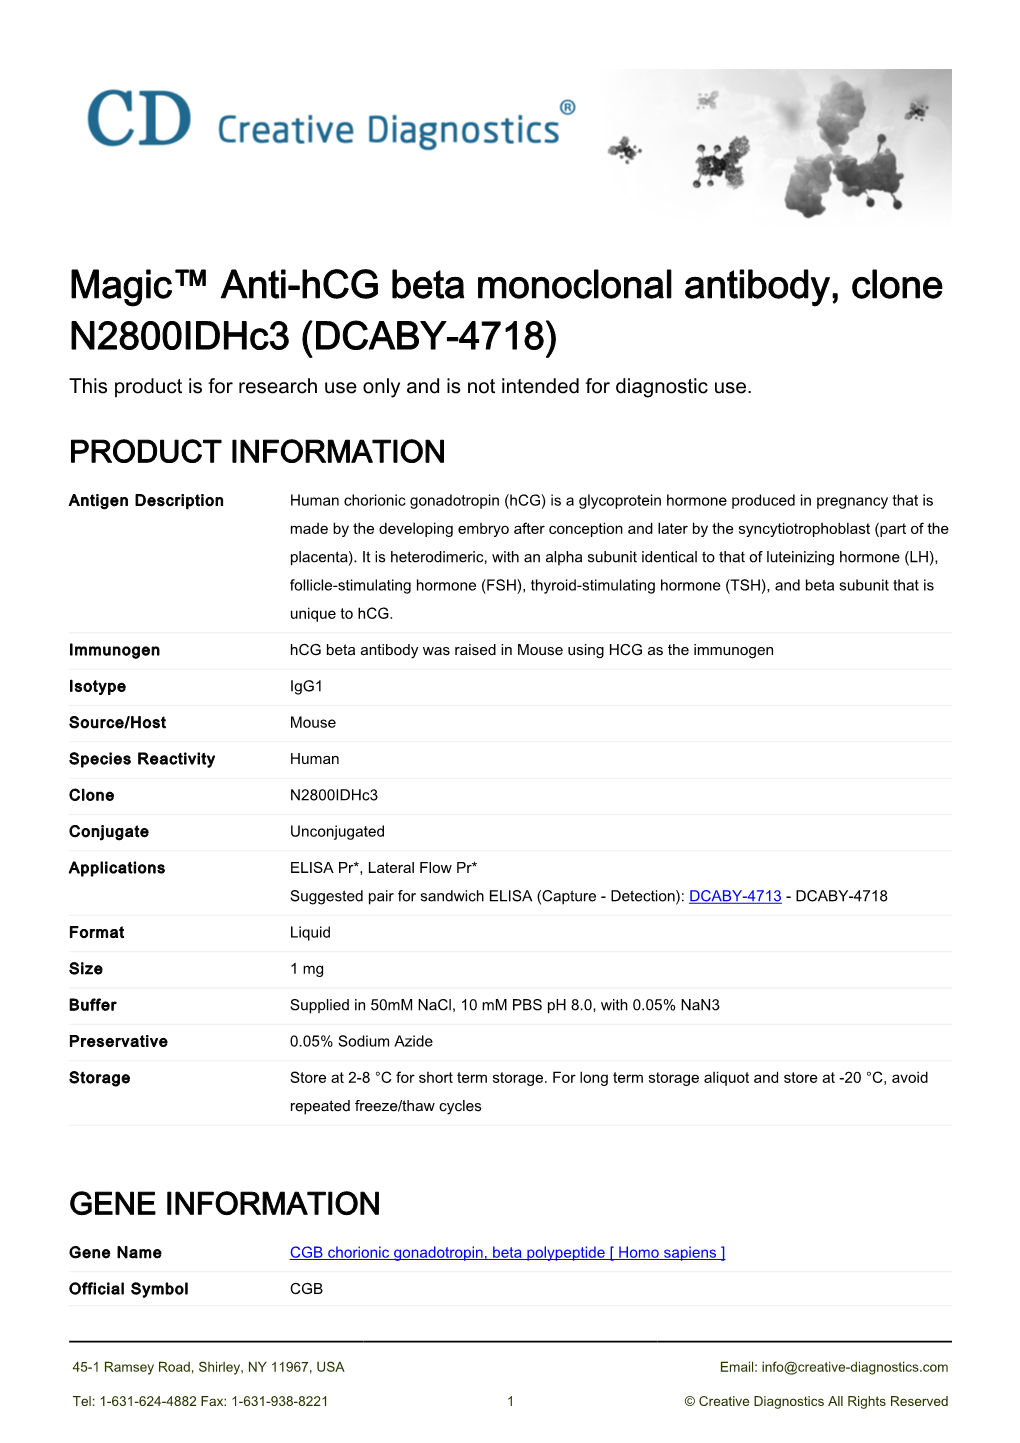 Magic™ Anti-Hcg Beta Monoclonal Antibody, Clone N2800idhc3 (DCABY-4718) This Product Is for Research Use Only and Is Not Intended for Diagnostic Use